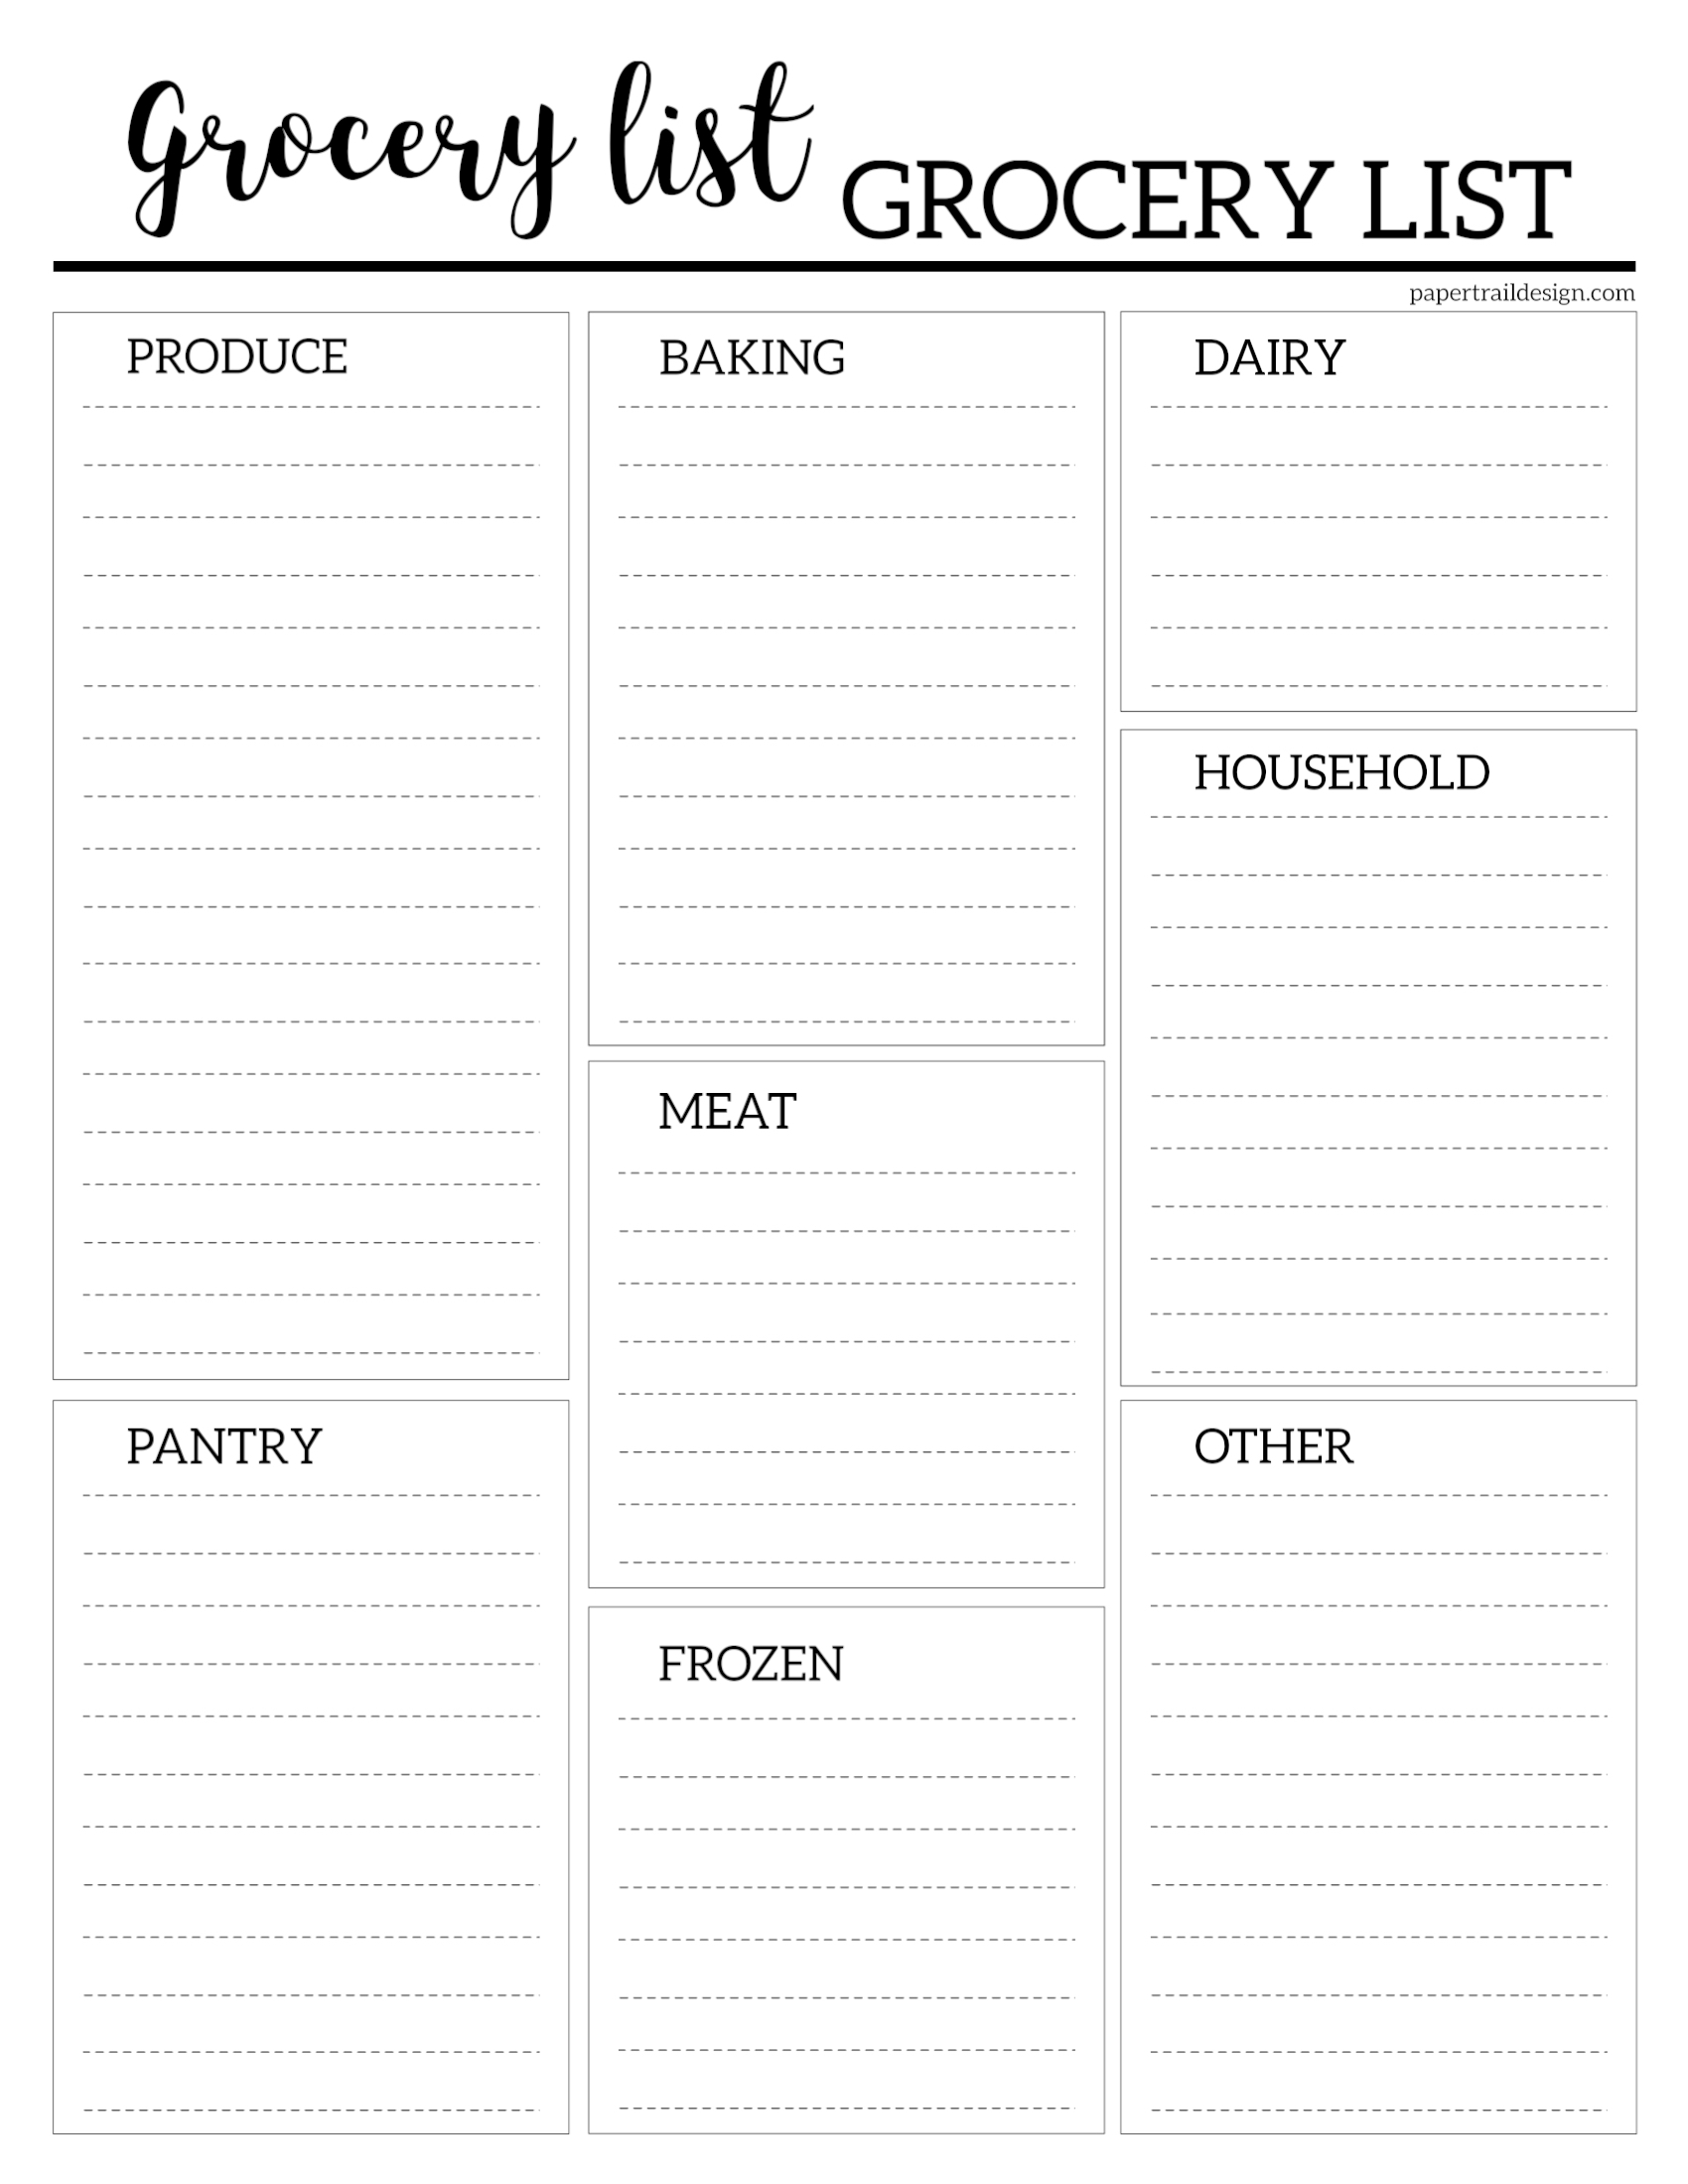 Free Grocery List Printable - Paper Trail Design Within Blank Grocery Shopping List Template